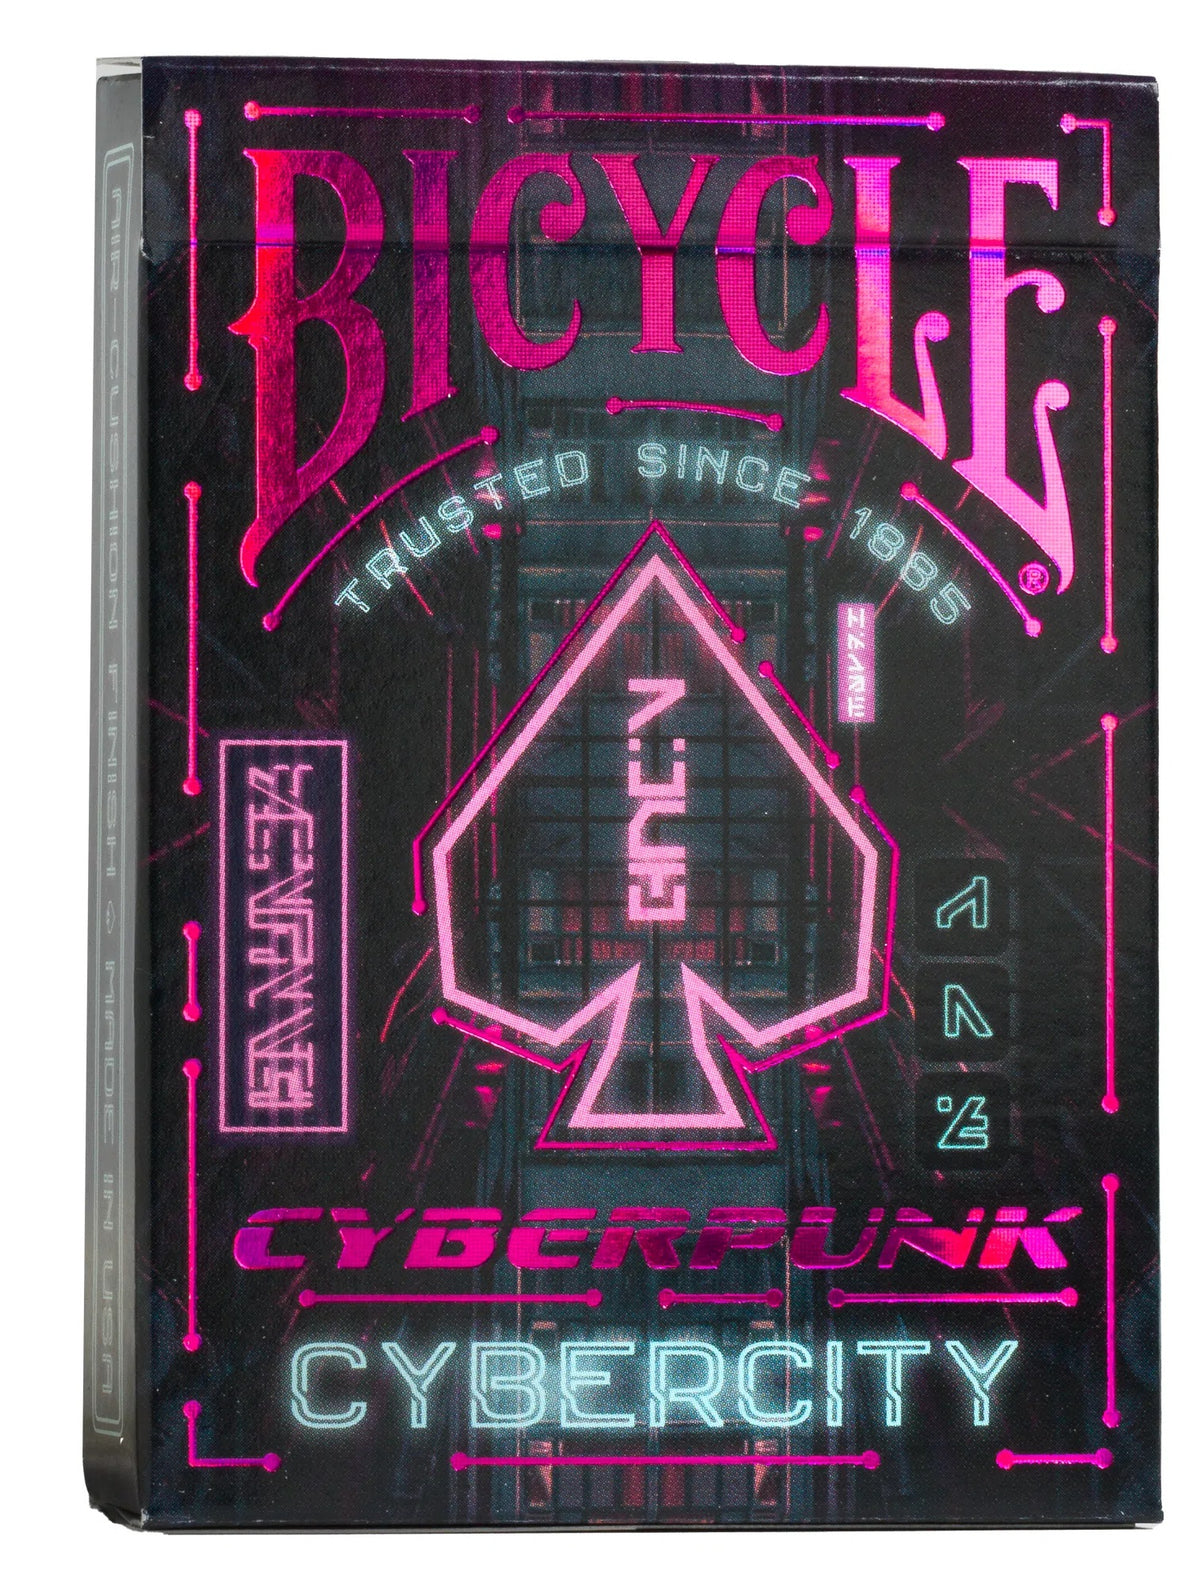 Bicycle Cyber City Playing Cards